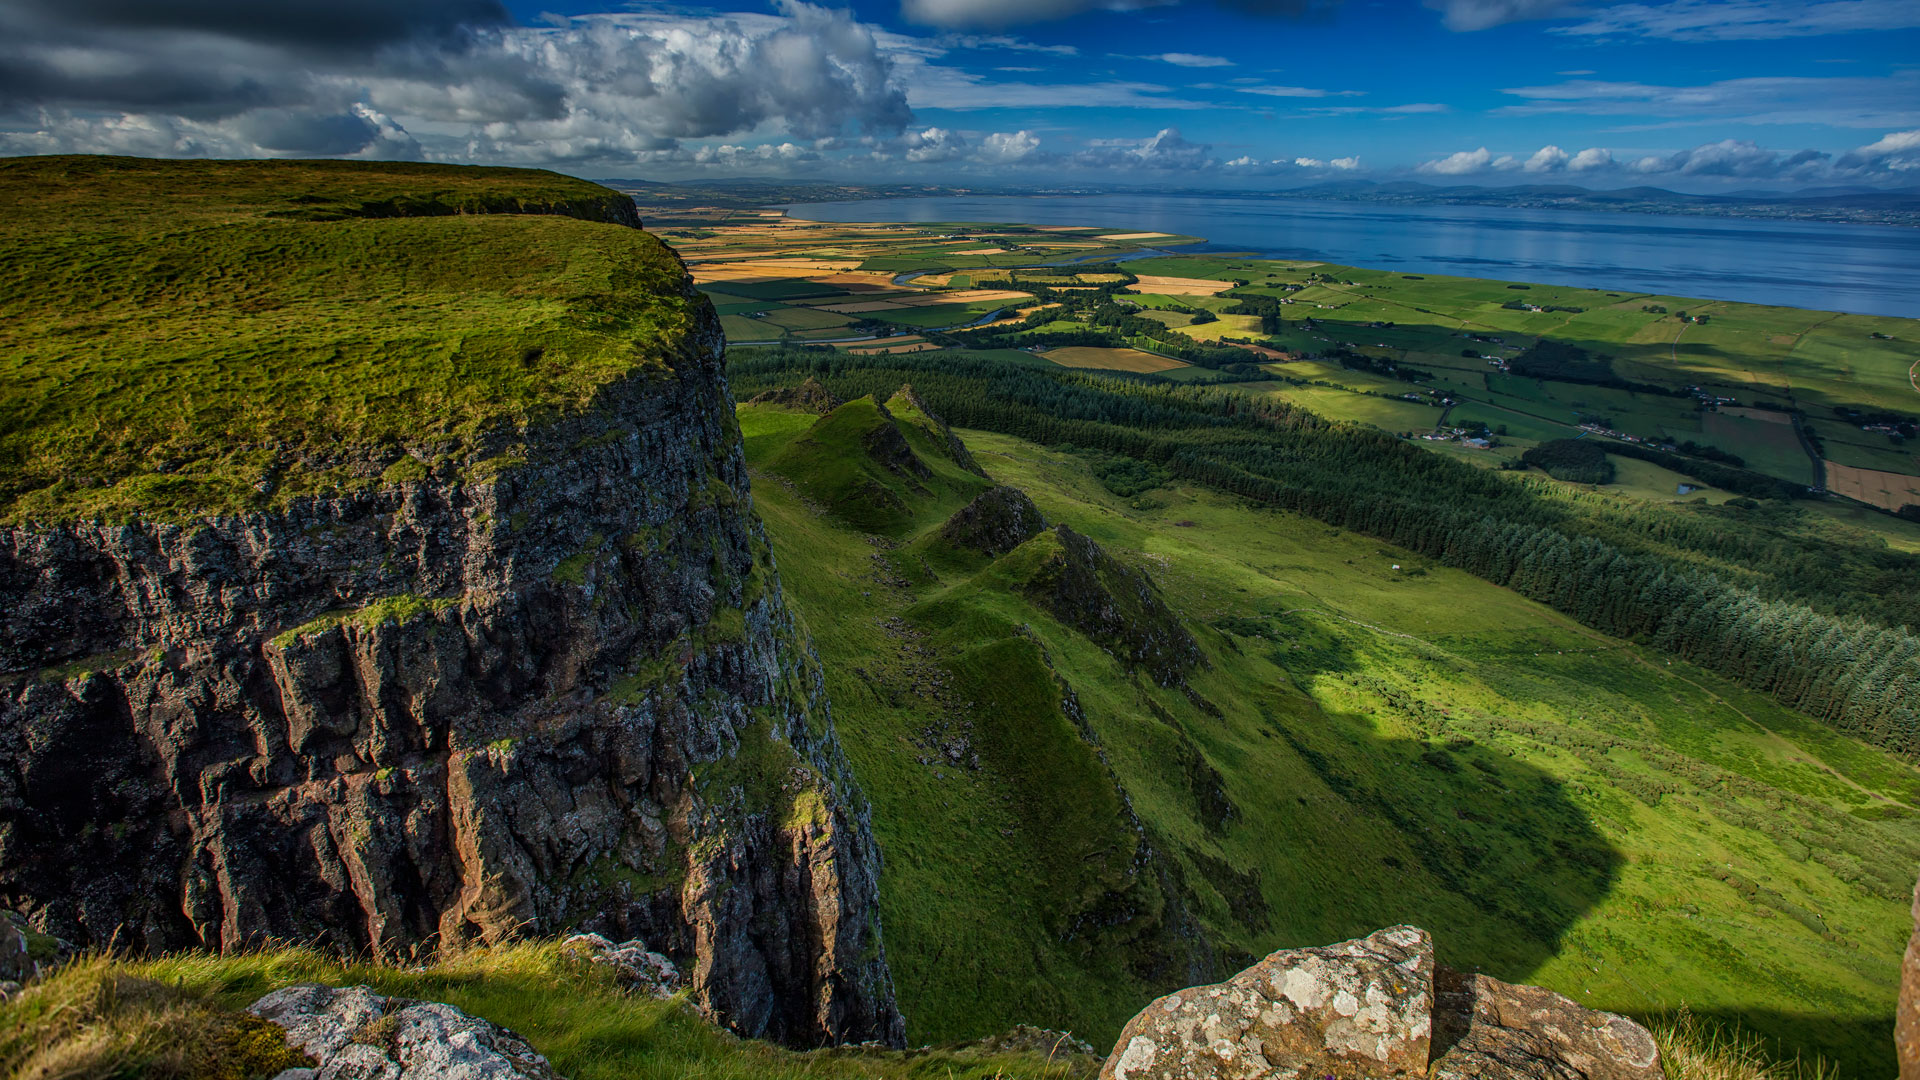 Game-of-Thrones-Filming-Location-Binevenagh-was-featured-as-the-Dothraki-Grasslands_1557861552.jpg